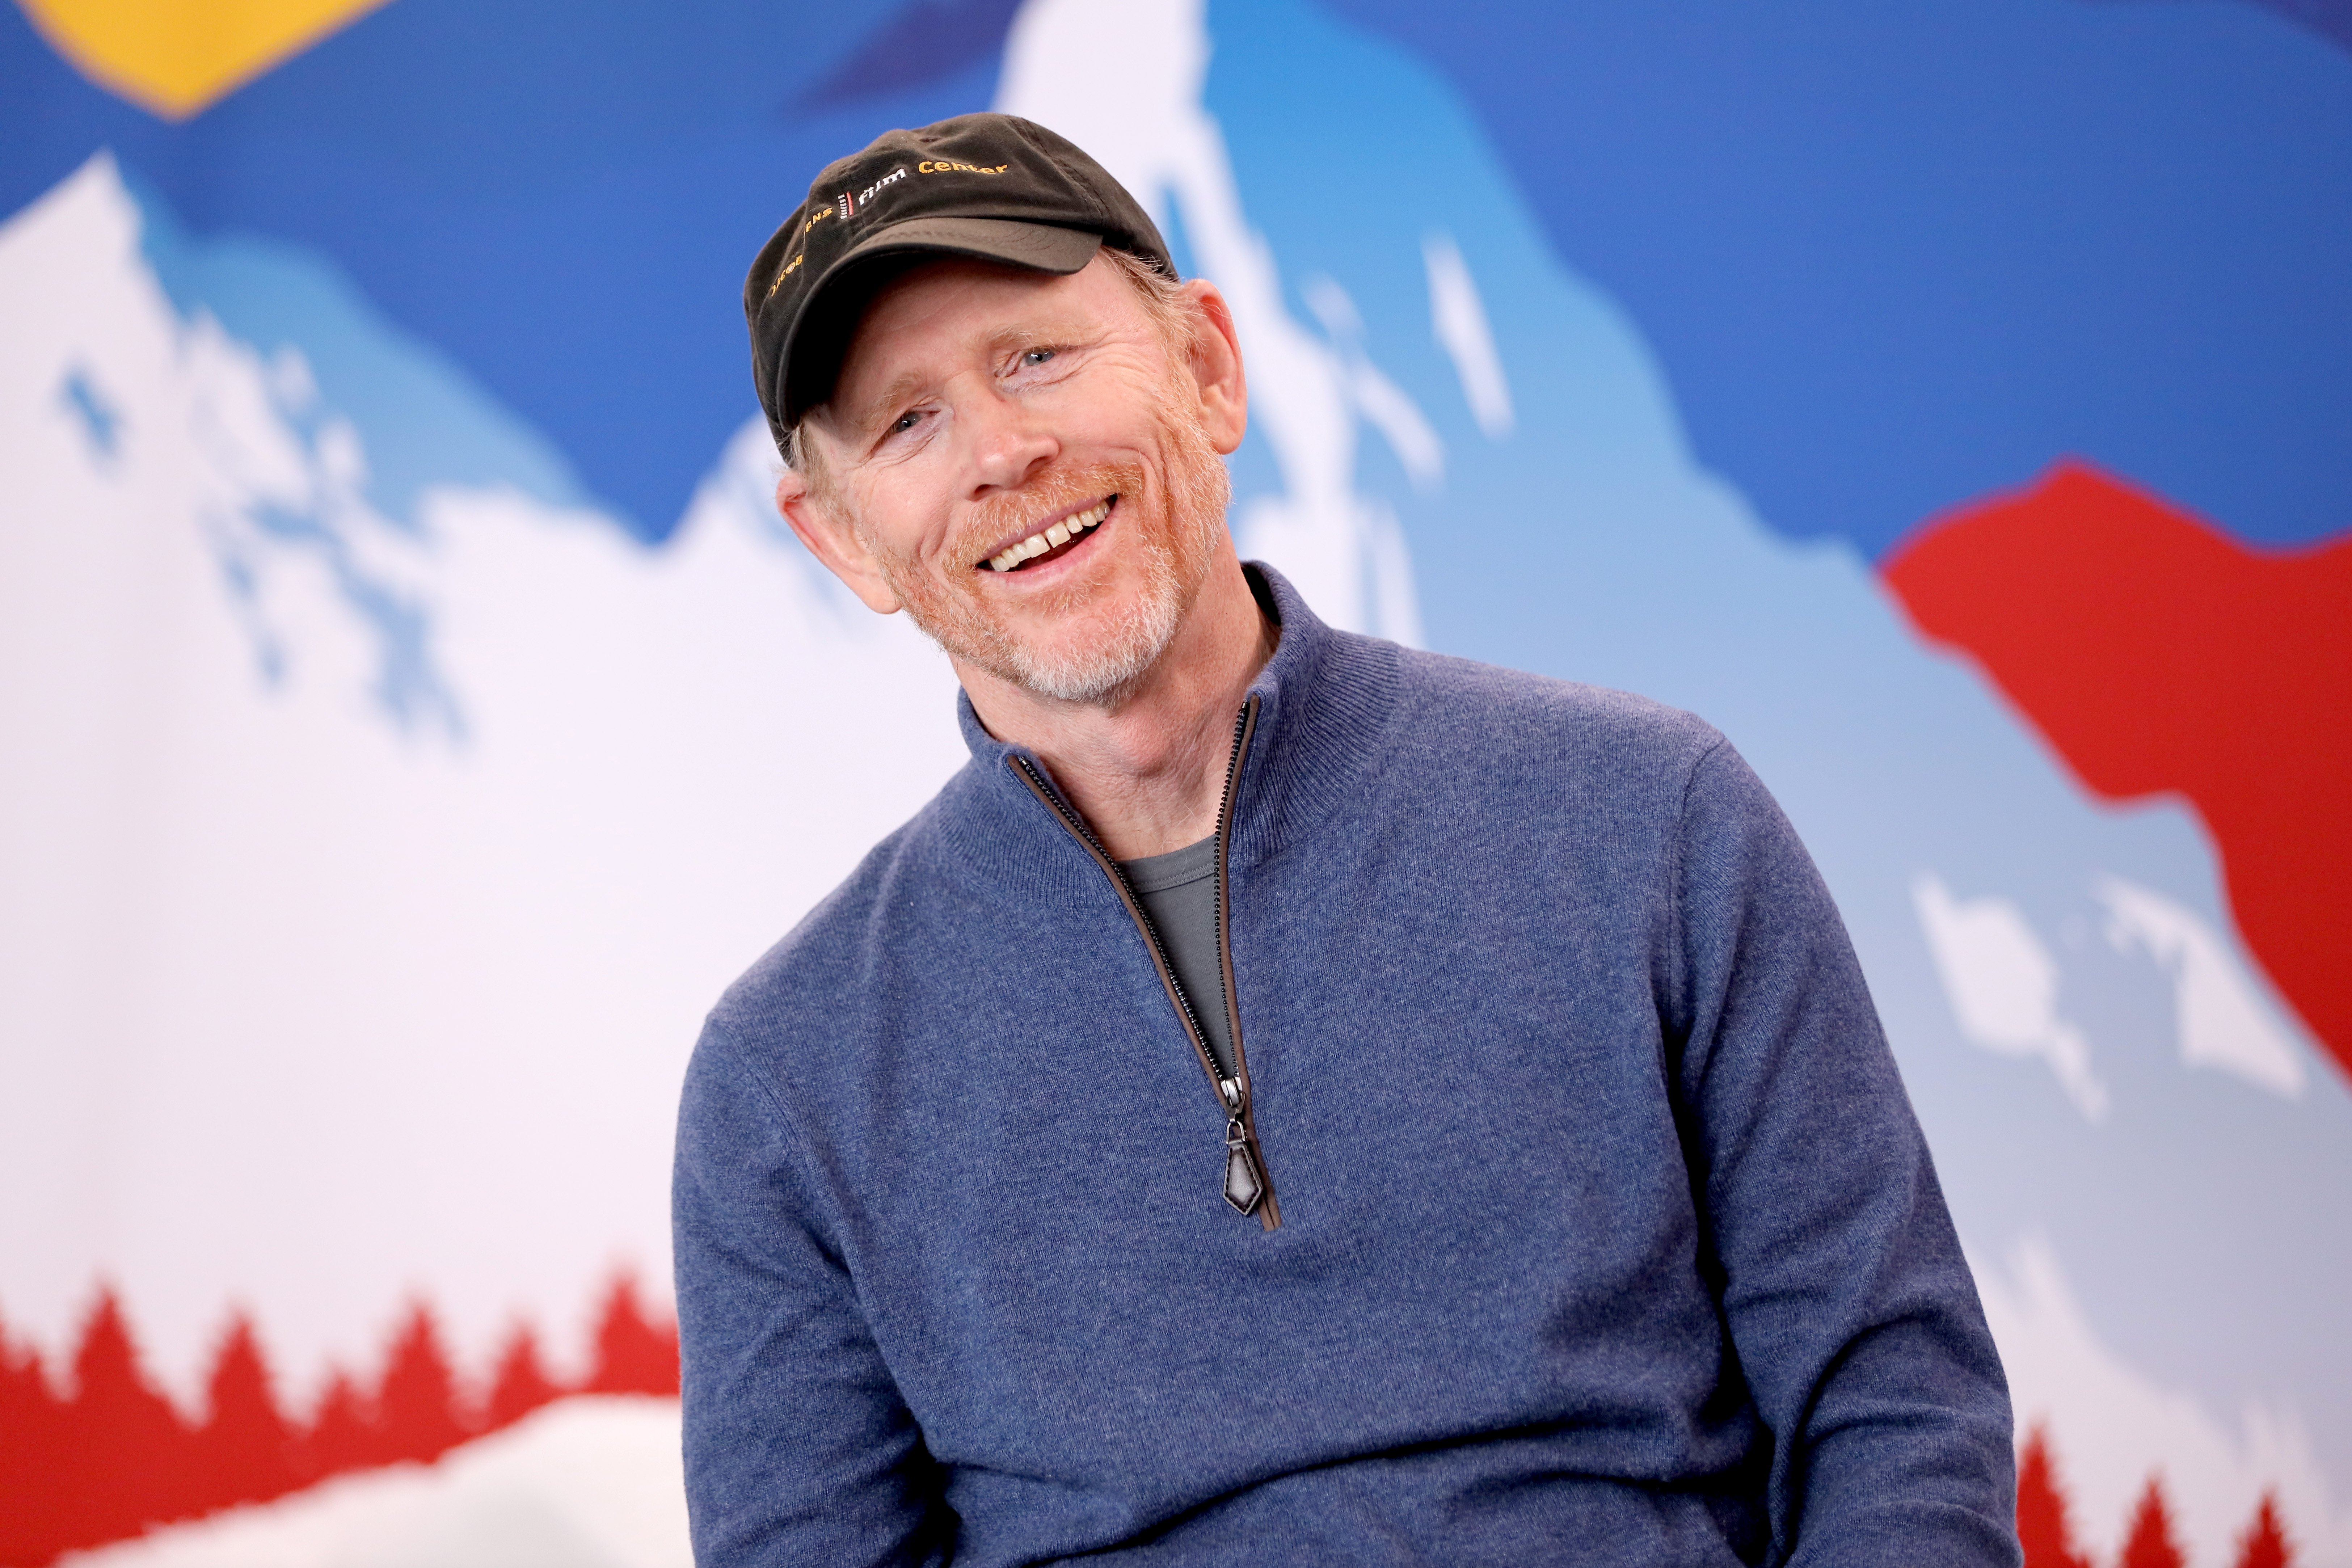 Ron Howard of 'Rebuilding Paradise' attends the IMDb Studio at Acura Festival Village on location at the 2020 Sundance Film Festival on January 24, 2020 in Park City, Utah | Photo: Getty Images